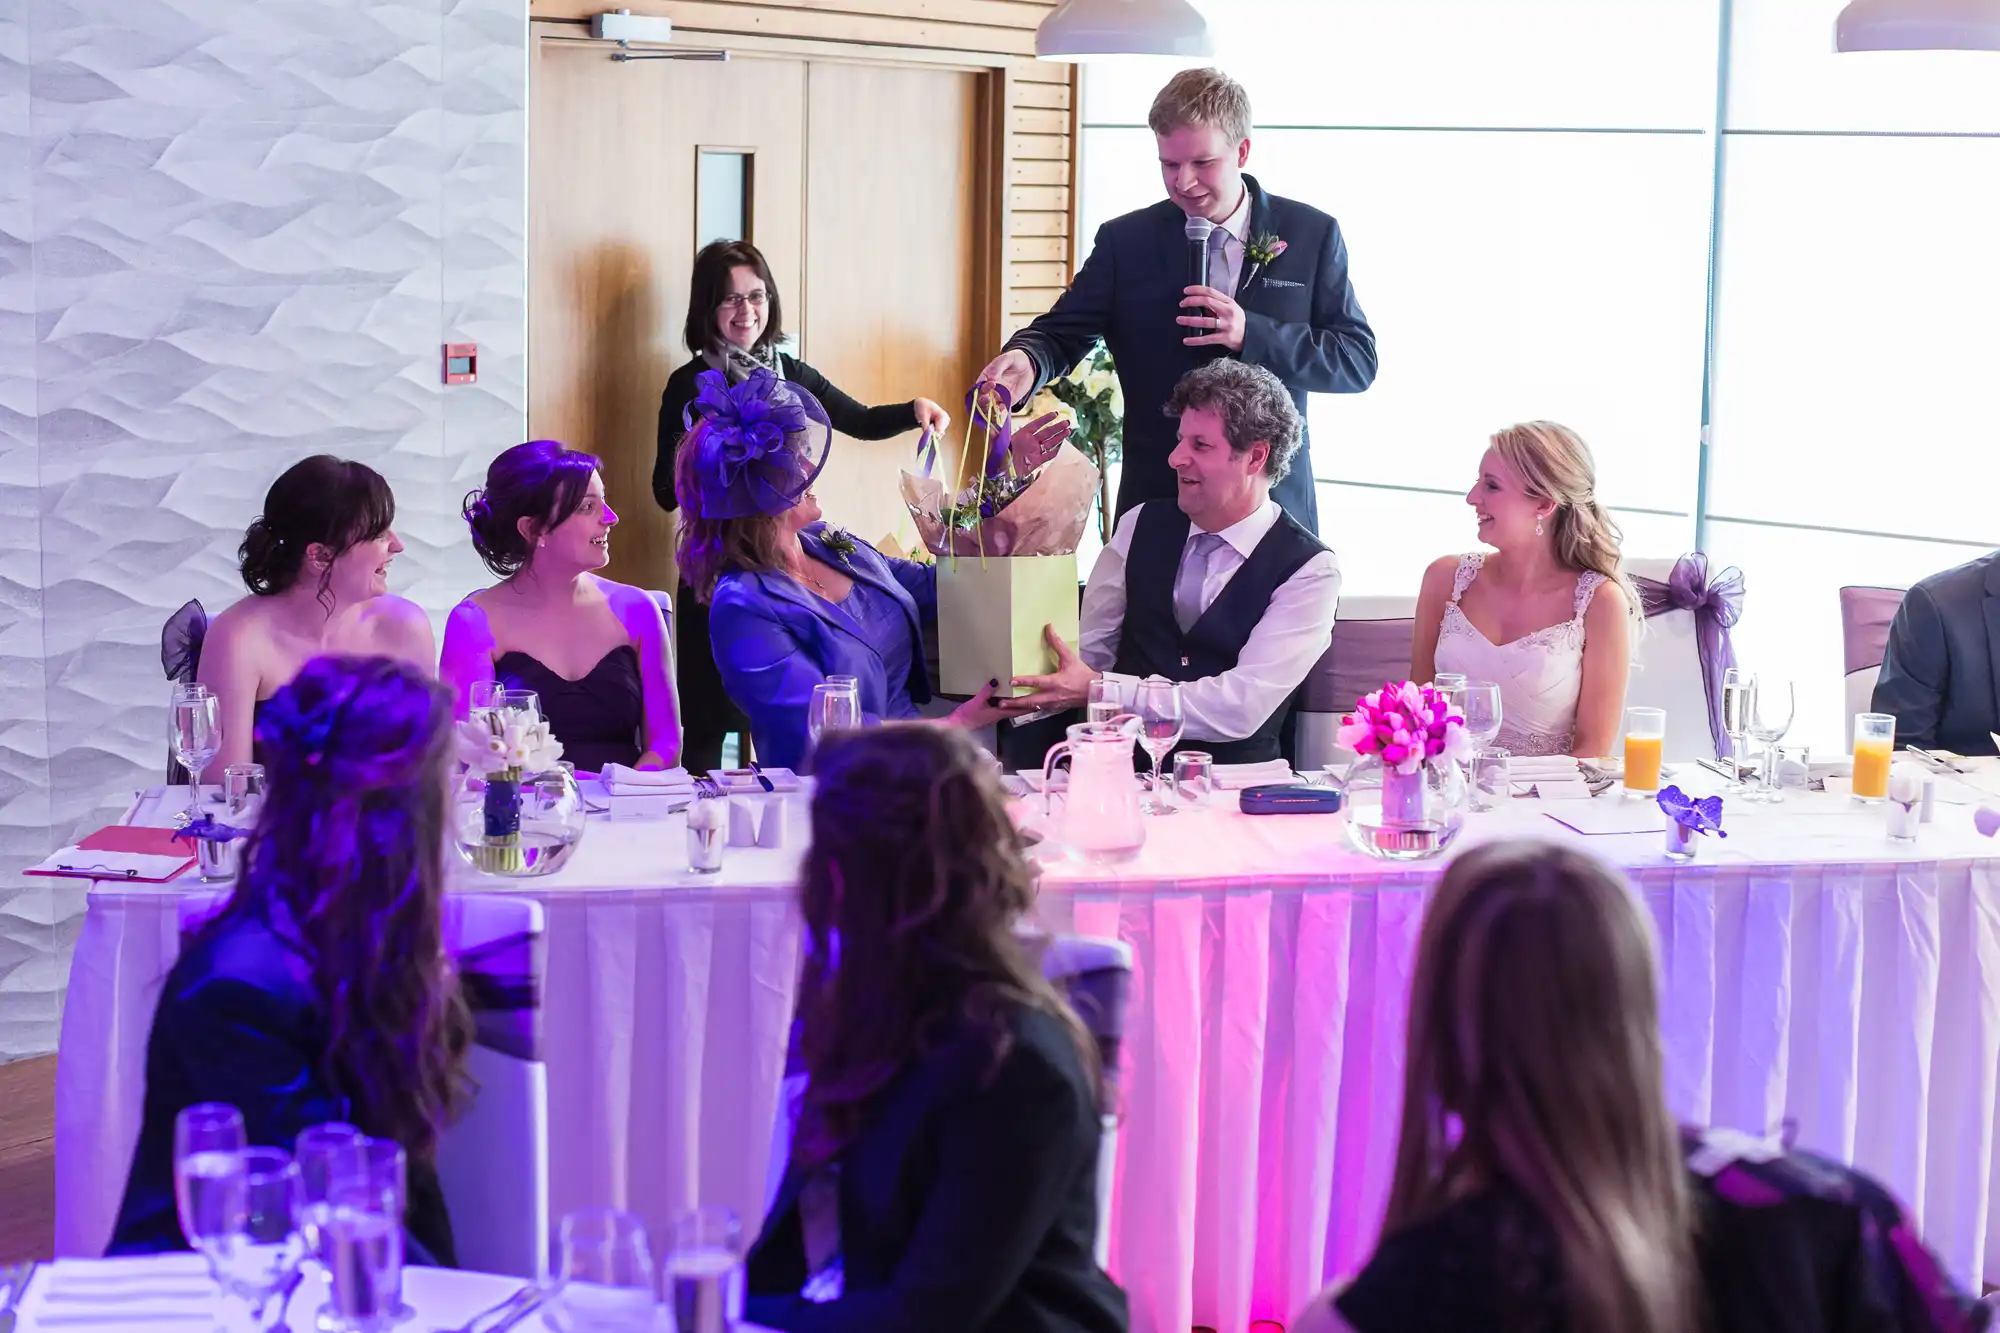 A wedding reception scene with guests seated at tables, focusing on a standing man giving a speech to a happy couple.